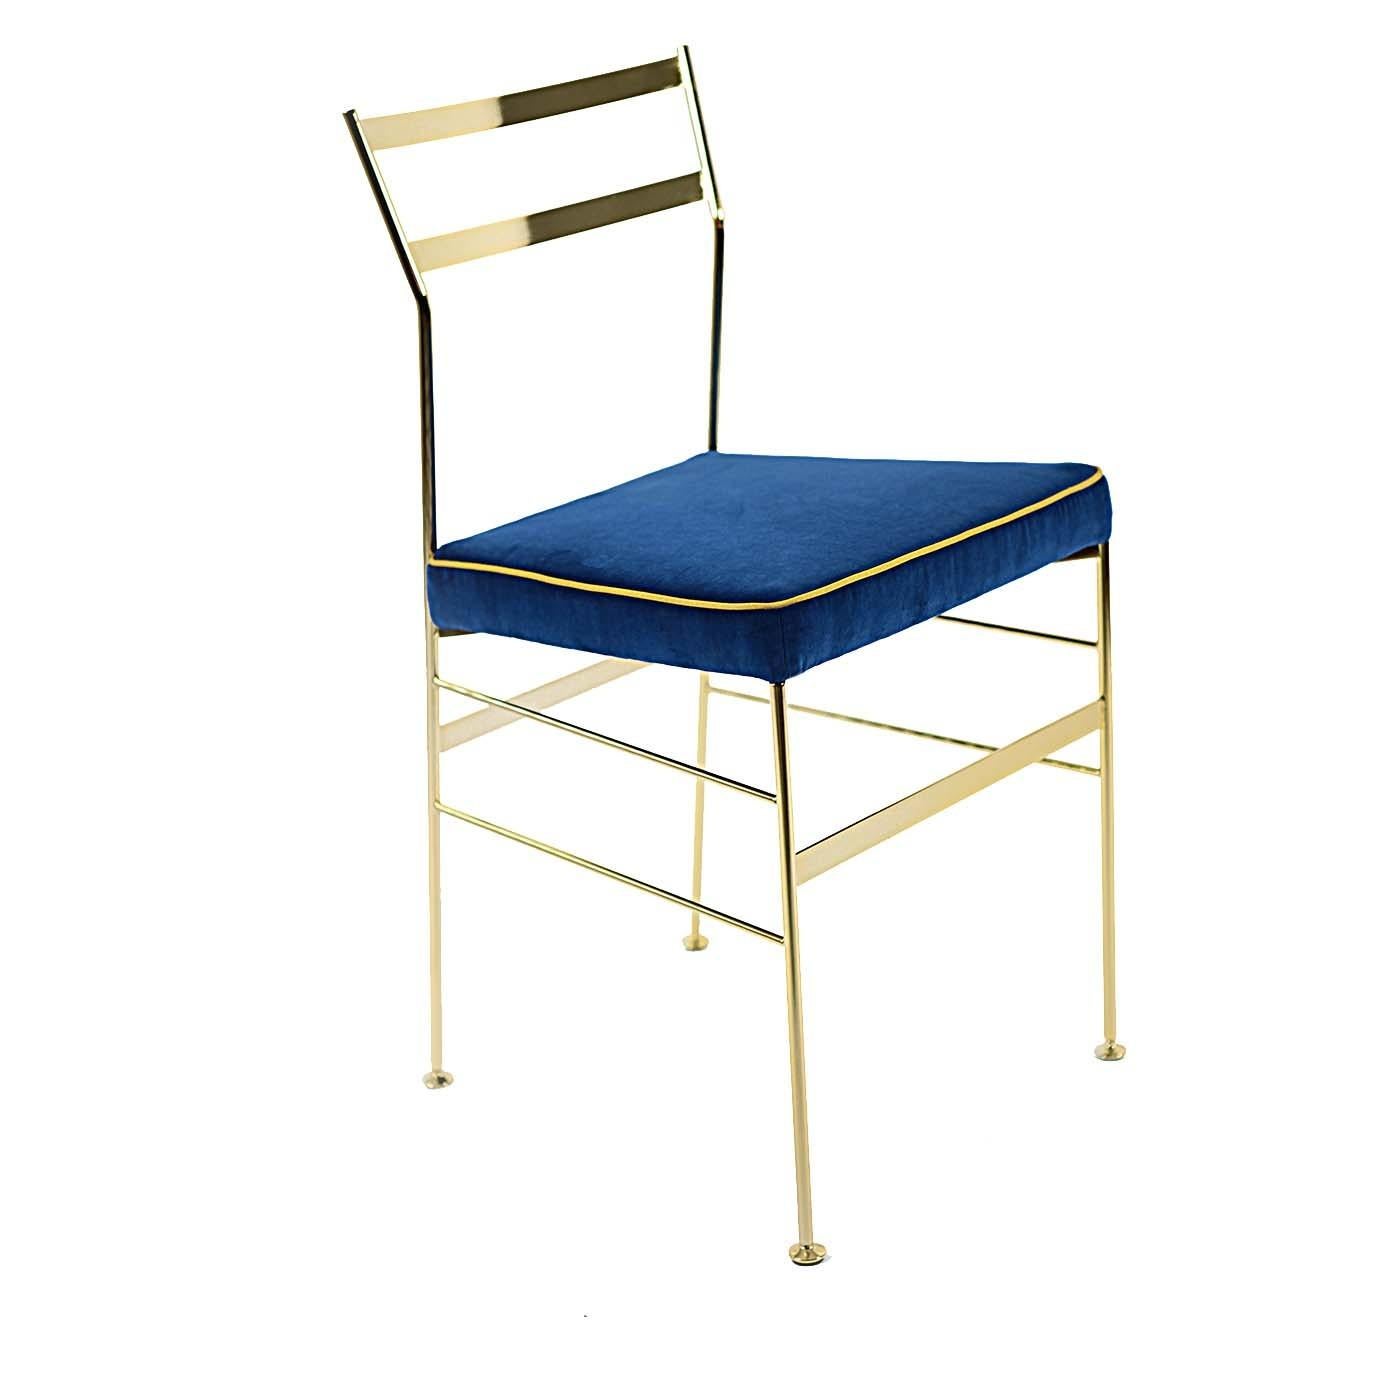 Handmade and elegant, this chair is a stunning addition to a modern interior, thanks to its Minimalist design, the striking color combination, and the precious materials used. The iron structure, with galvanized feet at the base, boasts a 24-karat